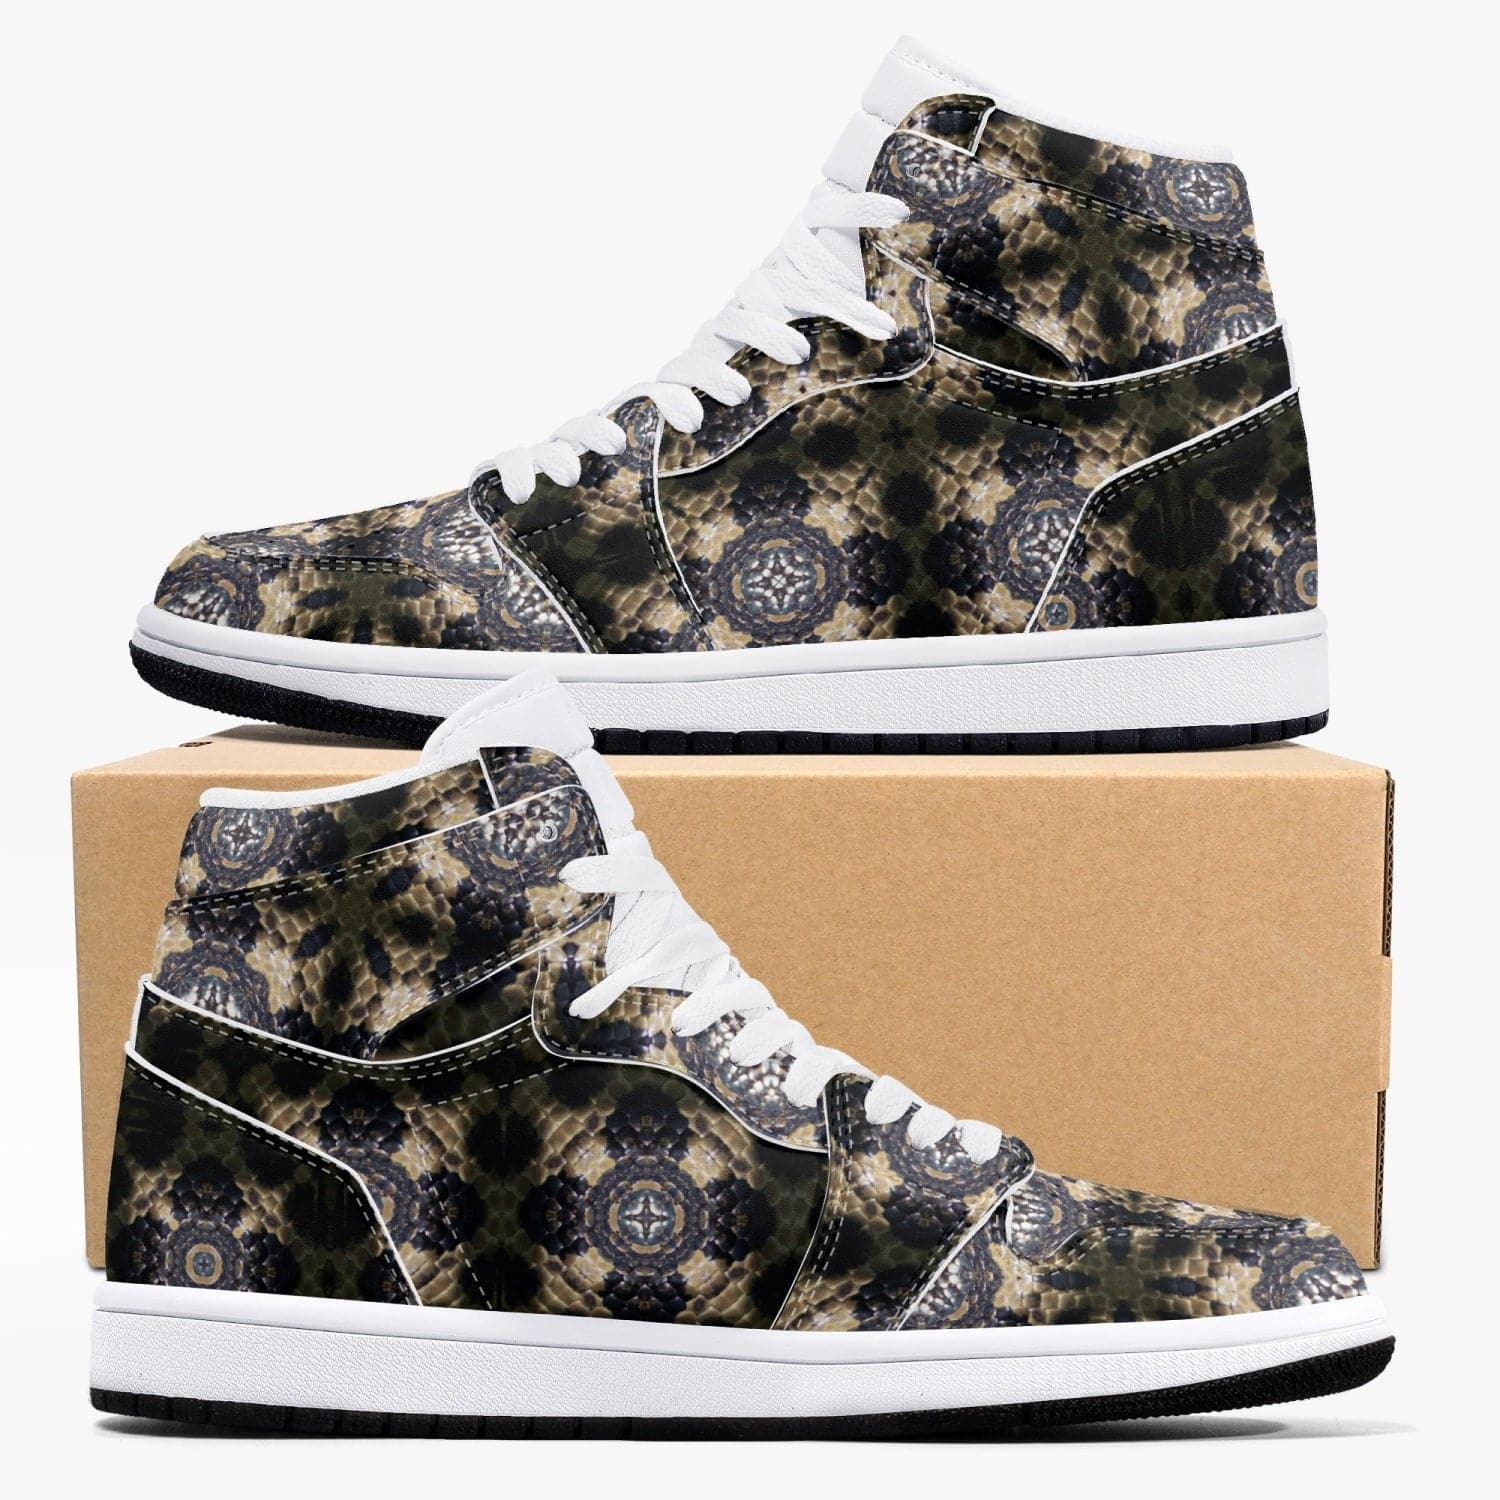 Rattle Snake Crossed pattern New Black High-Top Leather Sneakers for Men, by Sensus Studio Design